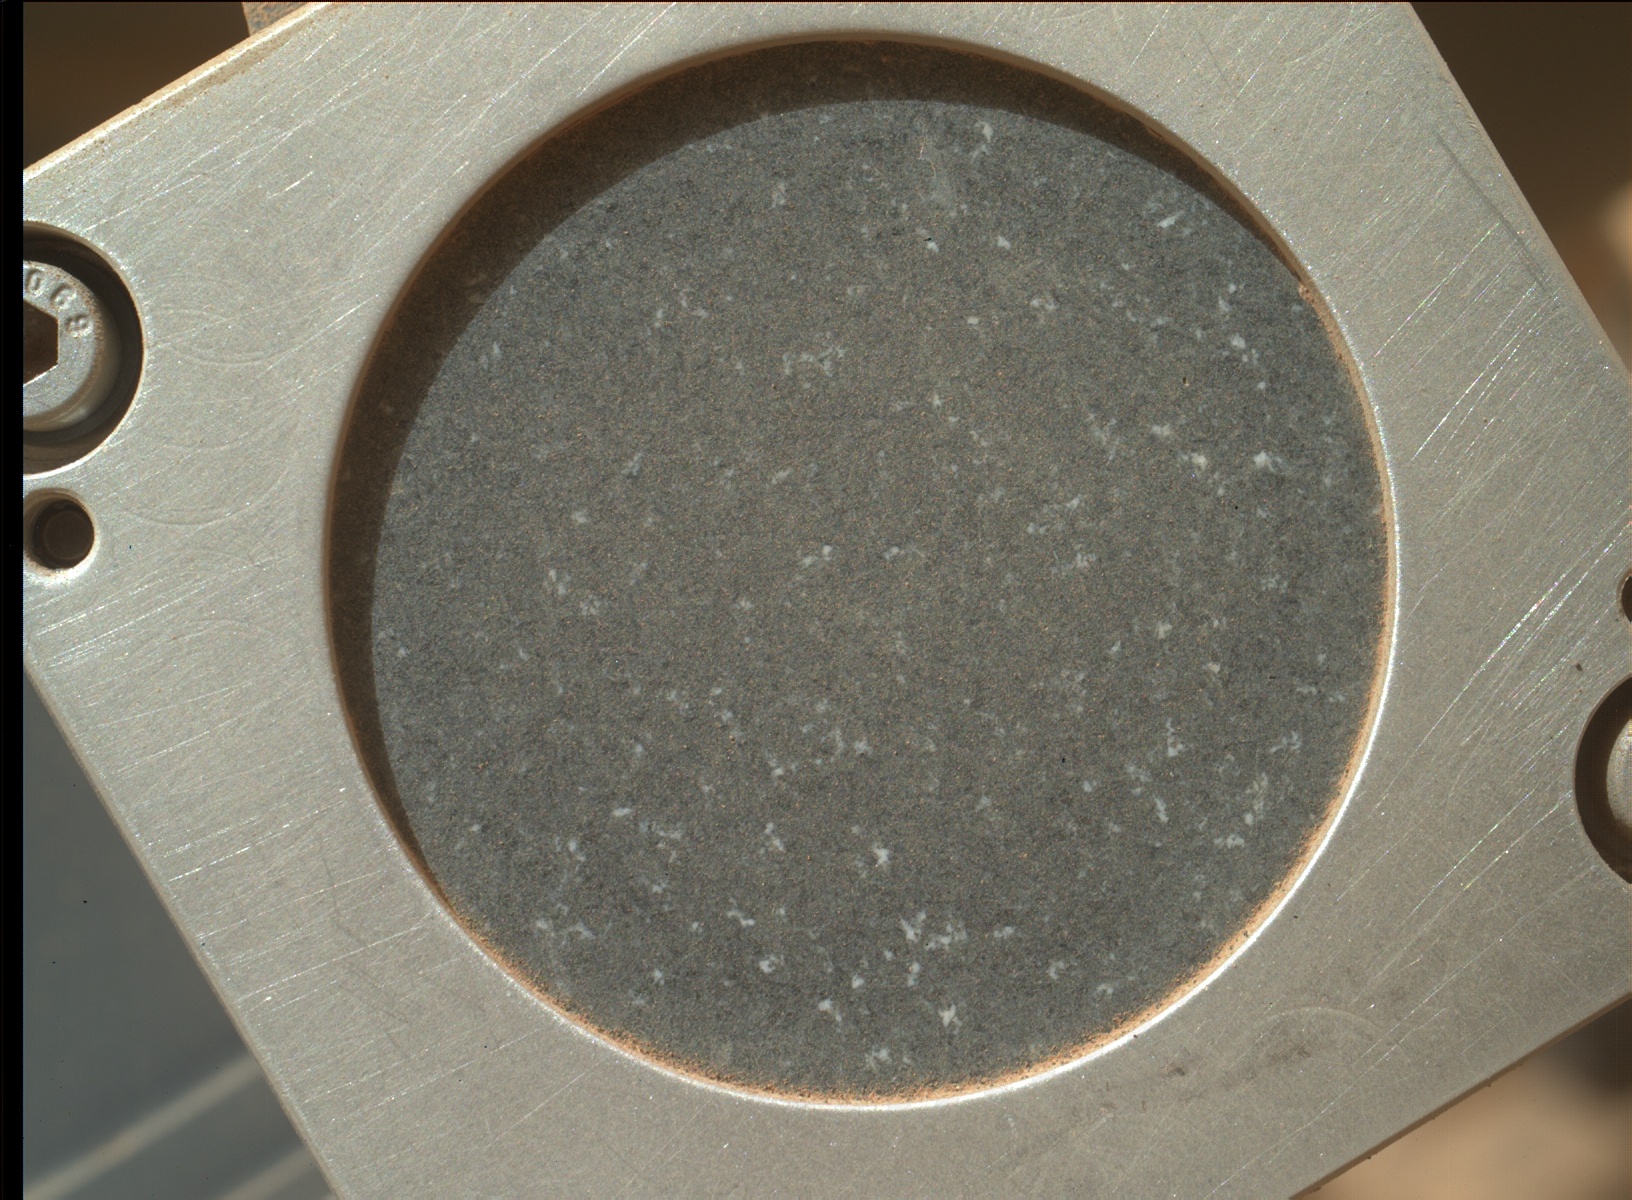 Nasa's Mars rover Curiosity acquired this image using its Mars Hand Lens Imager (MAHLI) on Sol 826